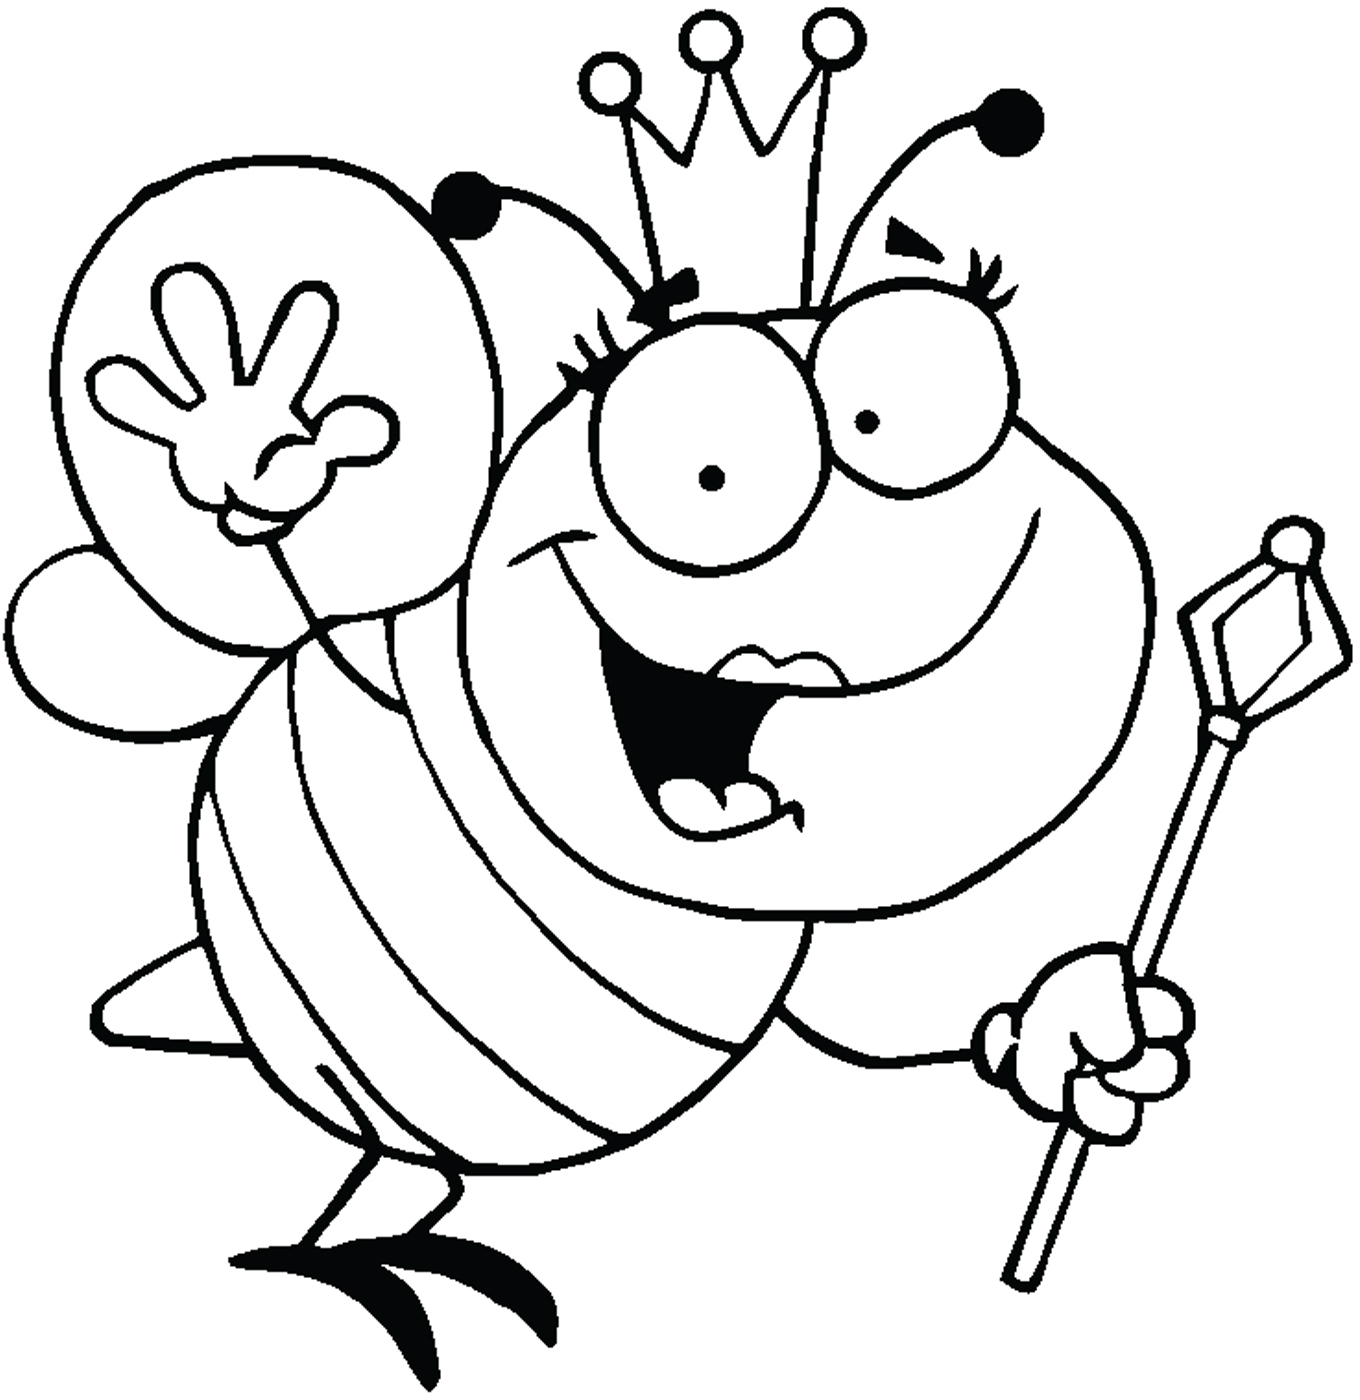 queen clipart black and white - photo #21